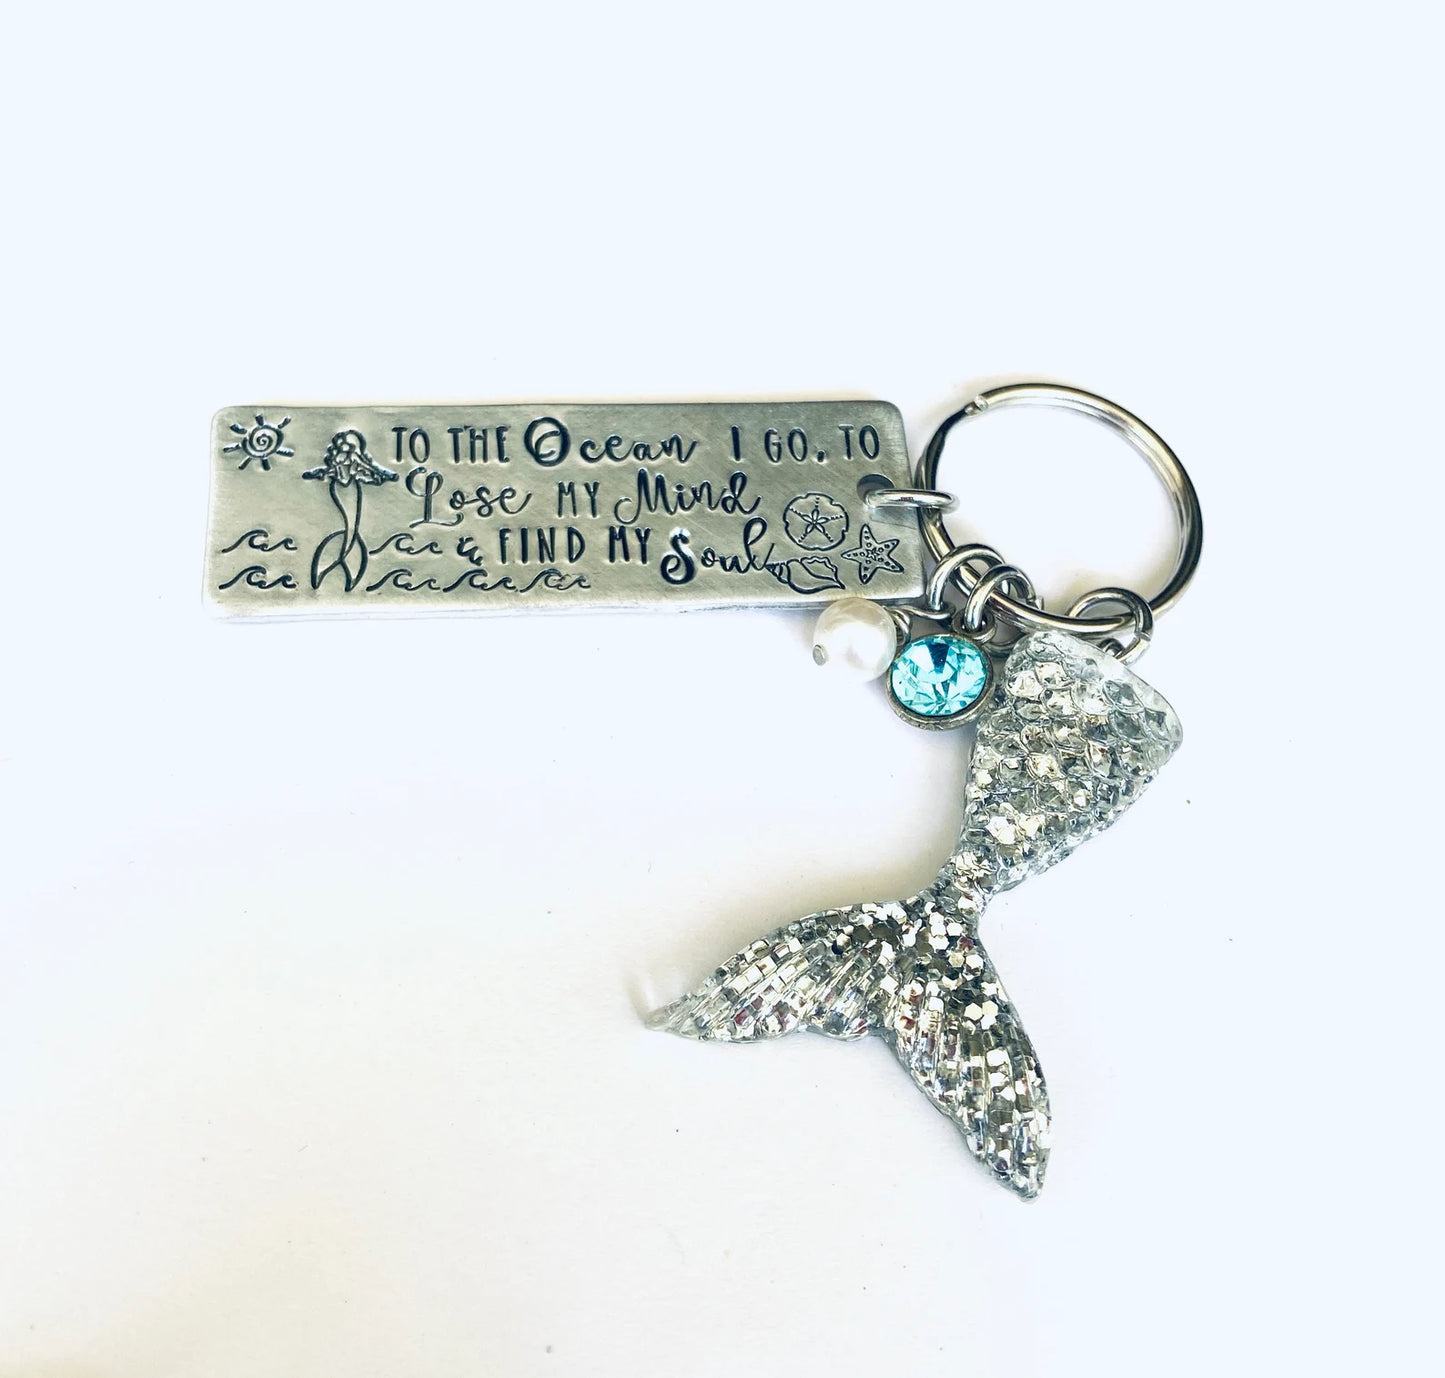 Mermaid key ring beach themed key ring salt life nautical key ring to the ocean I go to find my mind and lose my soul